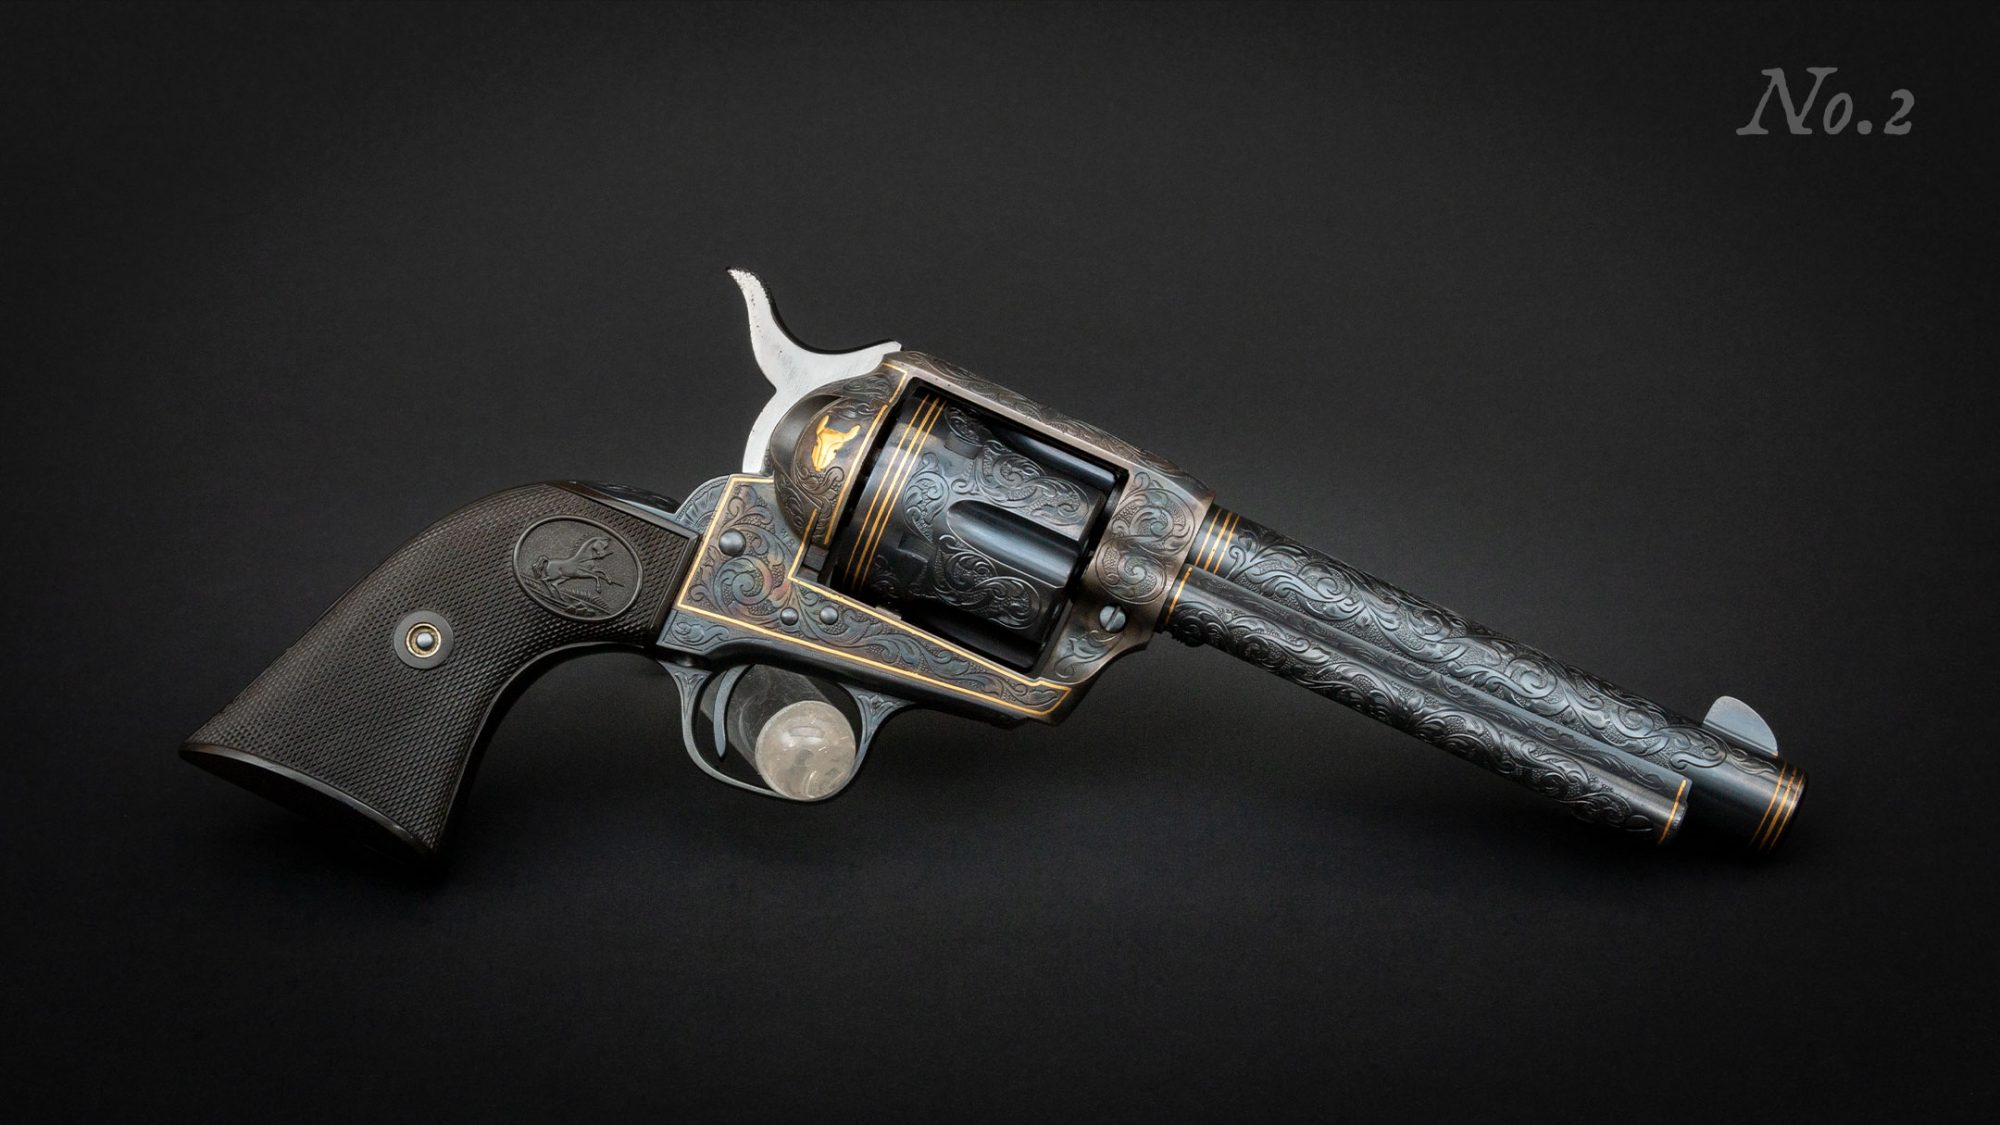 Second of a consecutive-numbered pair of 2nd Generation, Bledsoe-engraved, Colt Single Action Army revolvers, restored and for sale by Turnbull Restoration of Bloomfield, NY